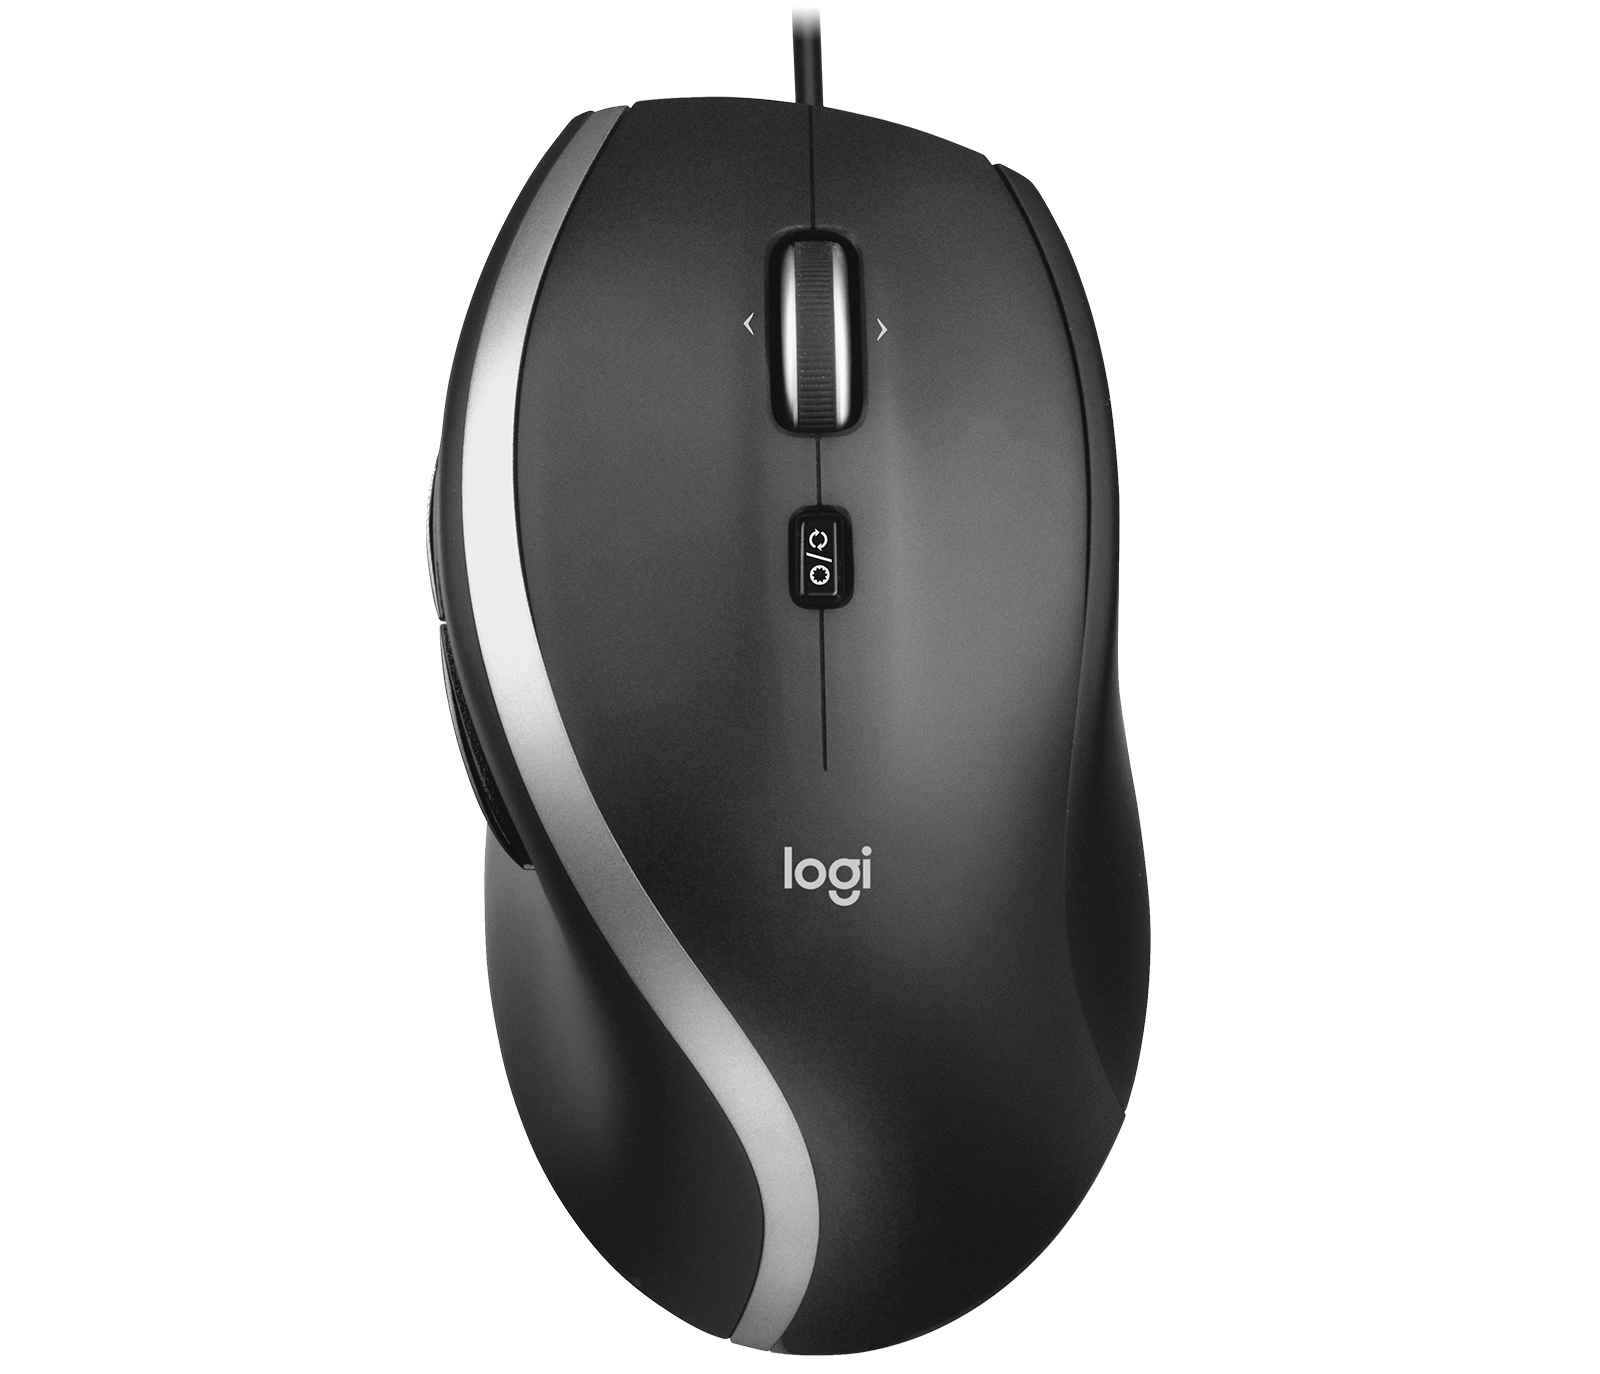 Logitech Corded Mouse with 7 Custom Buttons